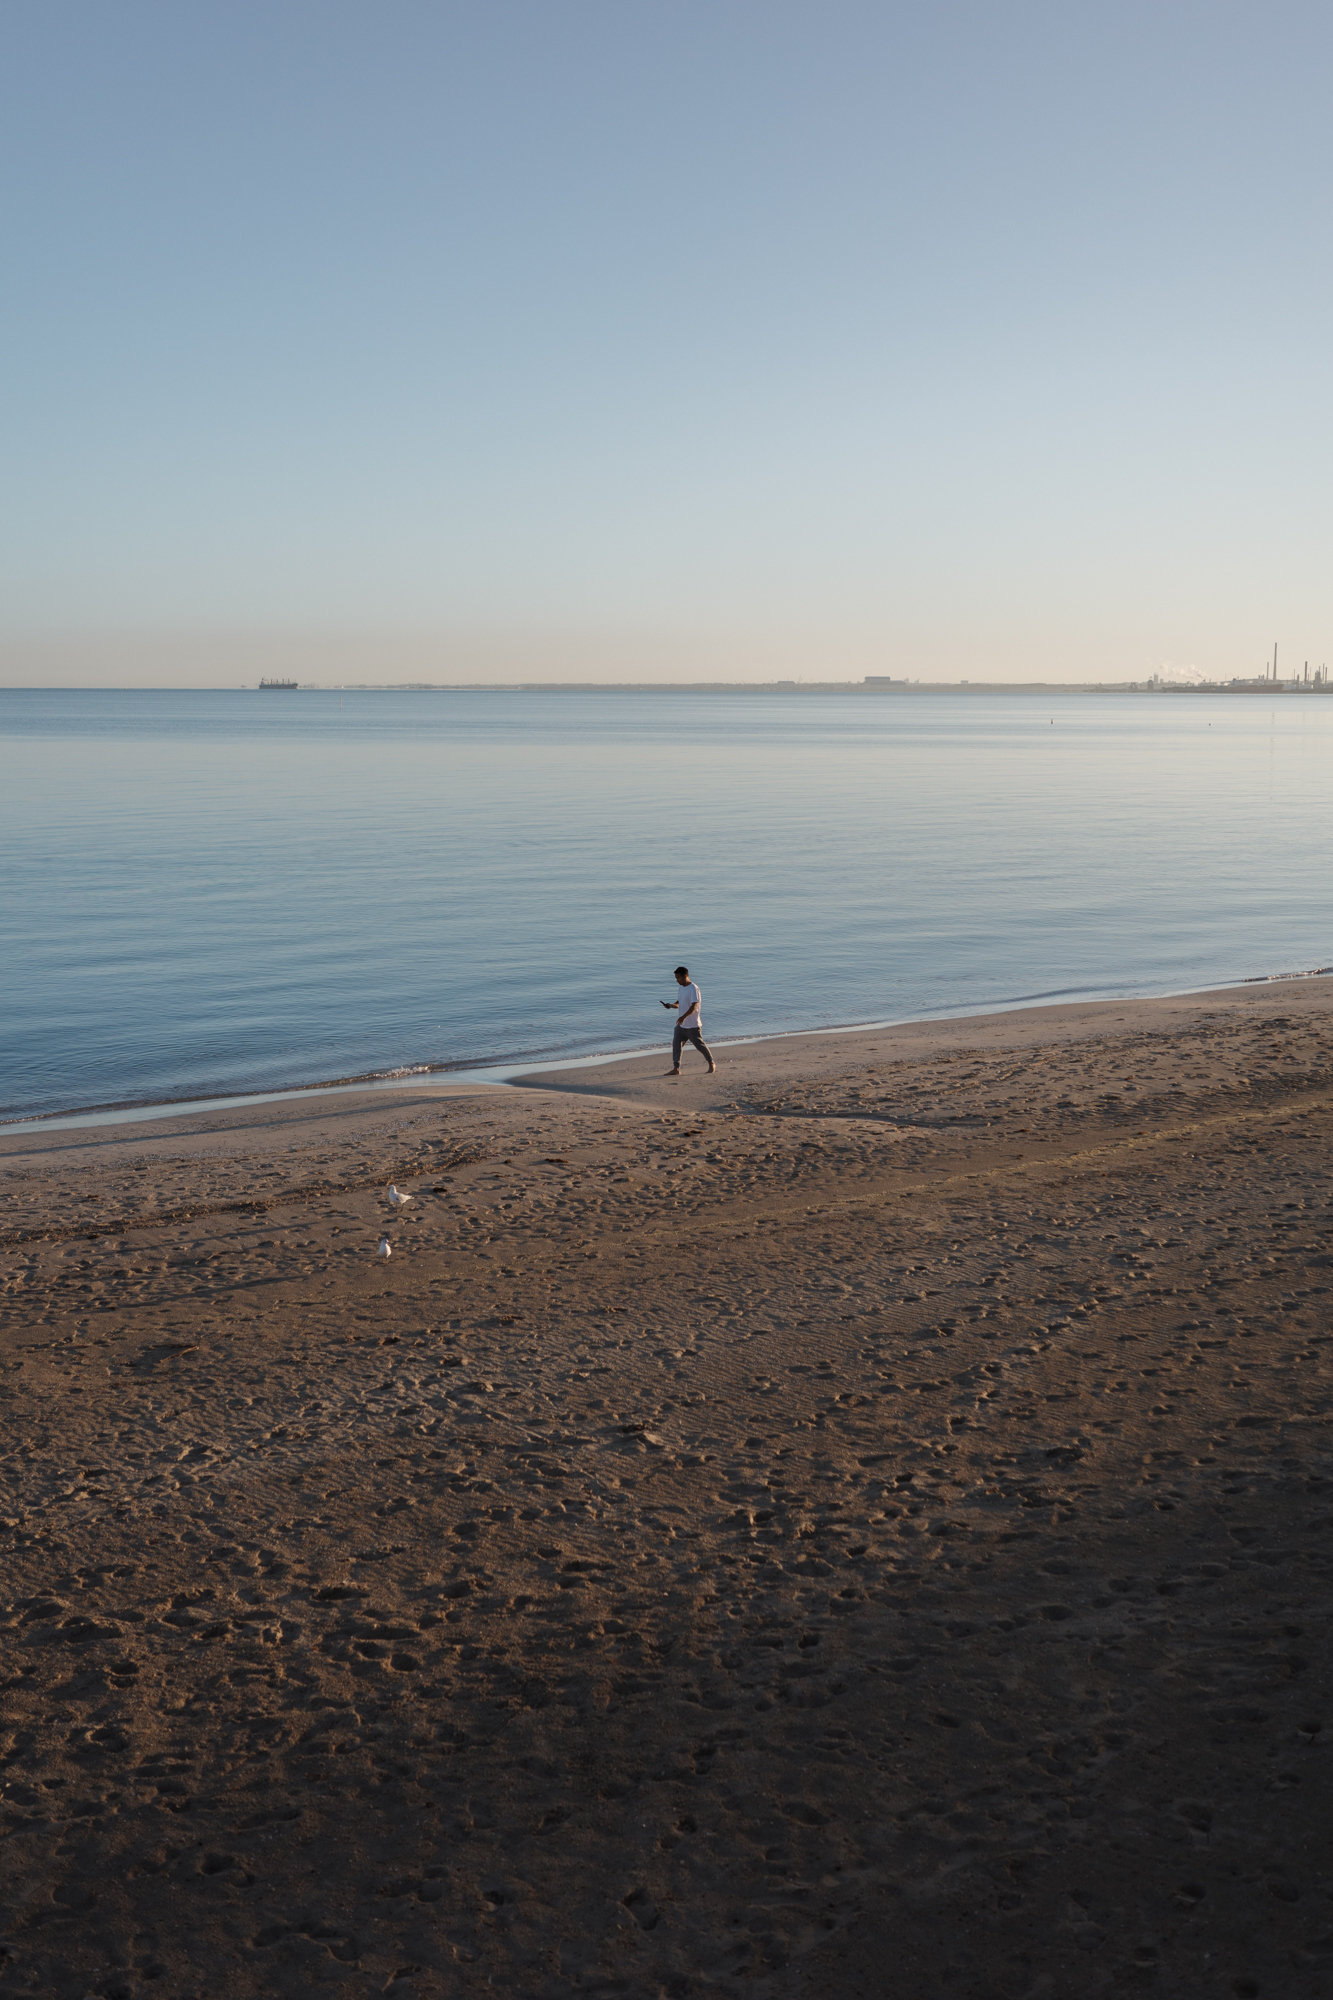 Auto-generated description: A lone individual jogs along the shoreline of a calm beach, with a clear sky above and the silhouettes of distant structures on the horizon.